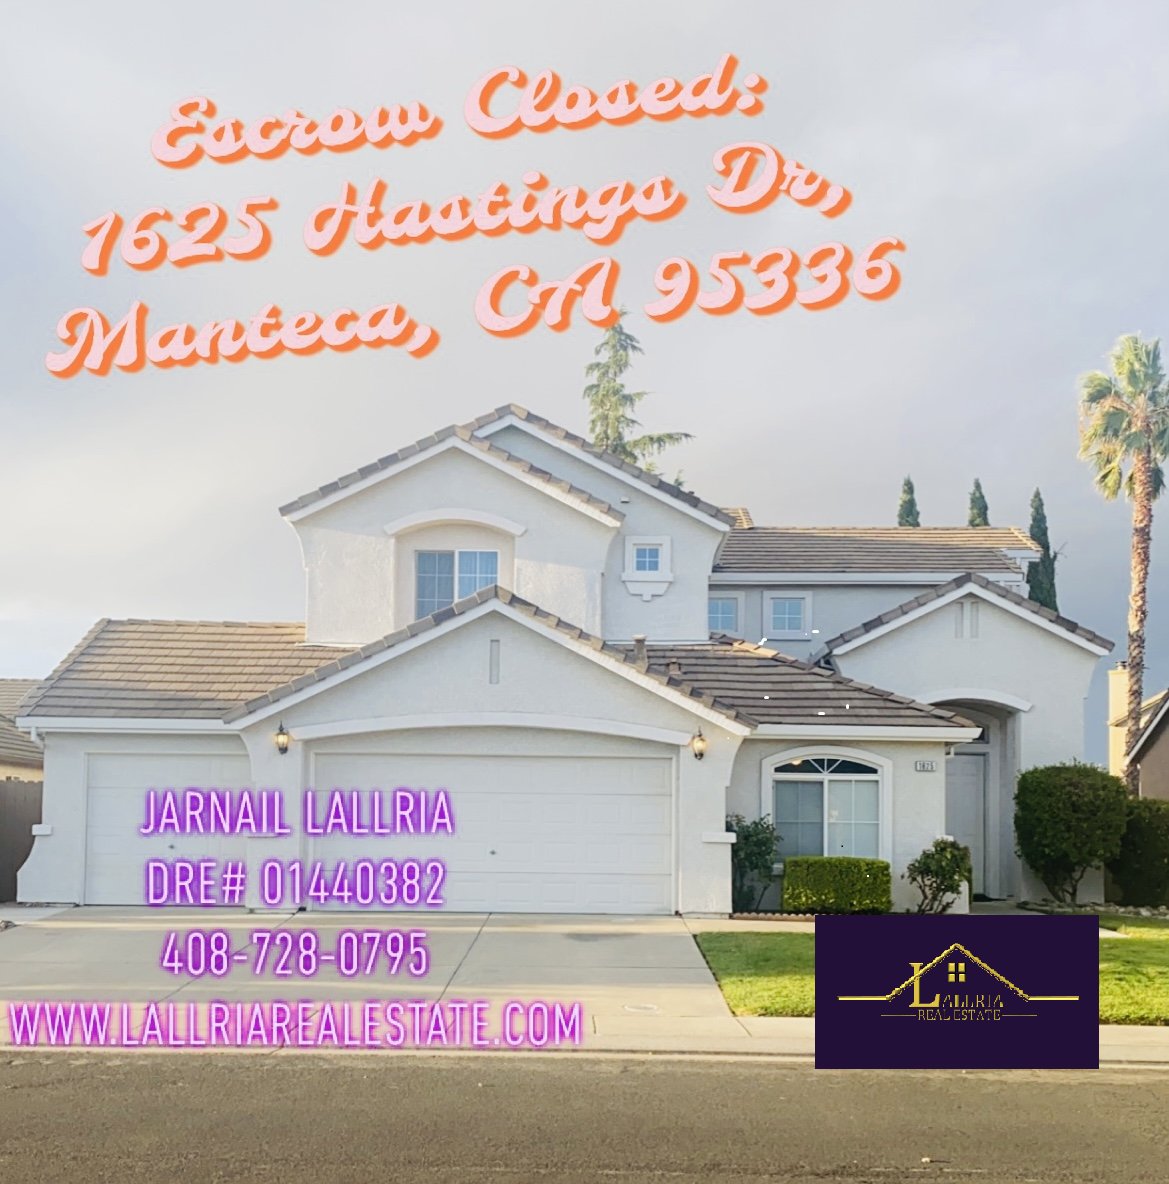 Escrow Closed, Time for KEY 🗝 1625 Hastings Dr, Manteca,CA 95336
Jarnail Lallria, DRE# 01440382
#realtor #happybuyer #happyfamily #buyeragent #lallriarealestate #firsttimebuyer #dreamhome🏡 #hothomes  #realestate #sellingcalifornia #realtorlife #realestateagent #realestatebroker